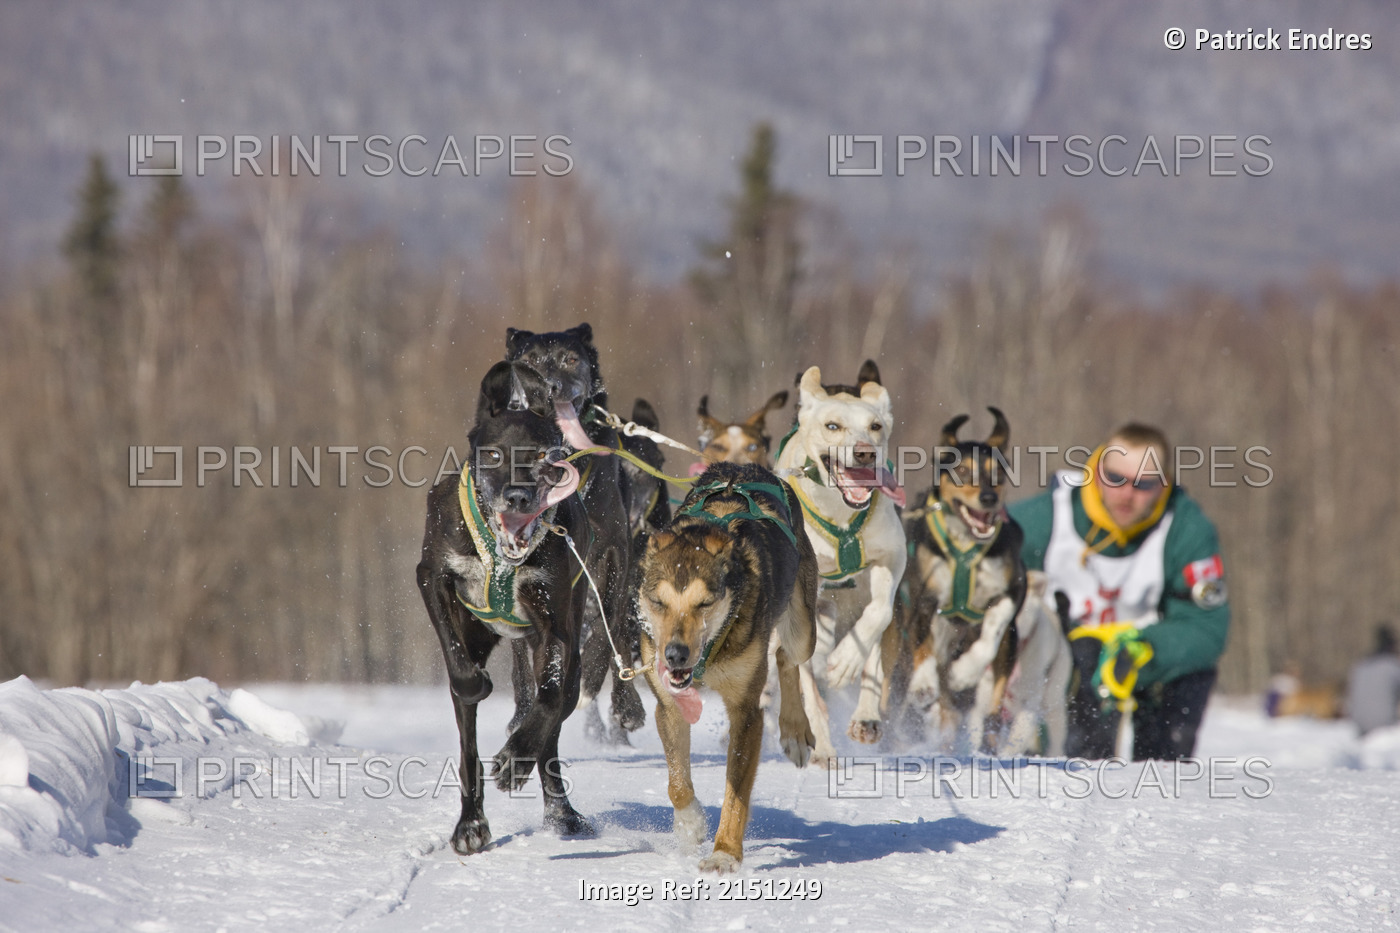 Buddy Streeper Races In The 2008 Open North American Championship Sled Dog Race